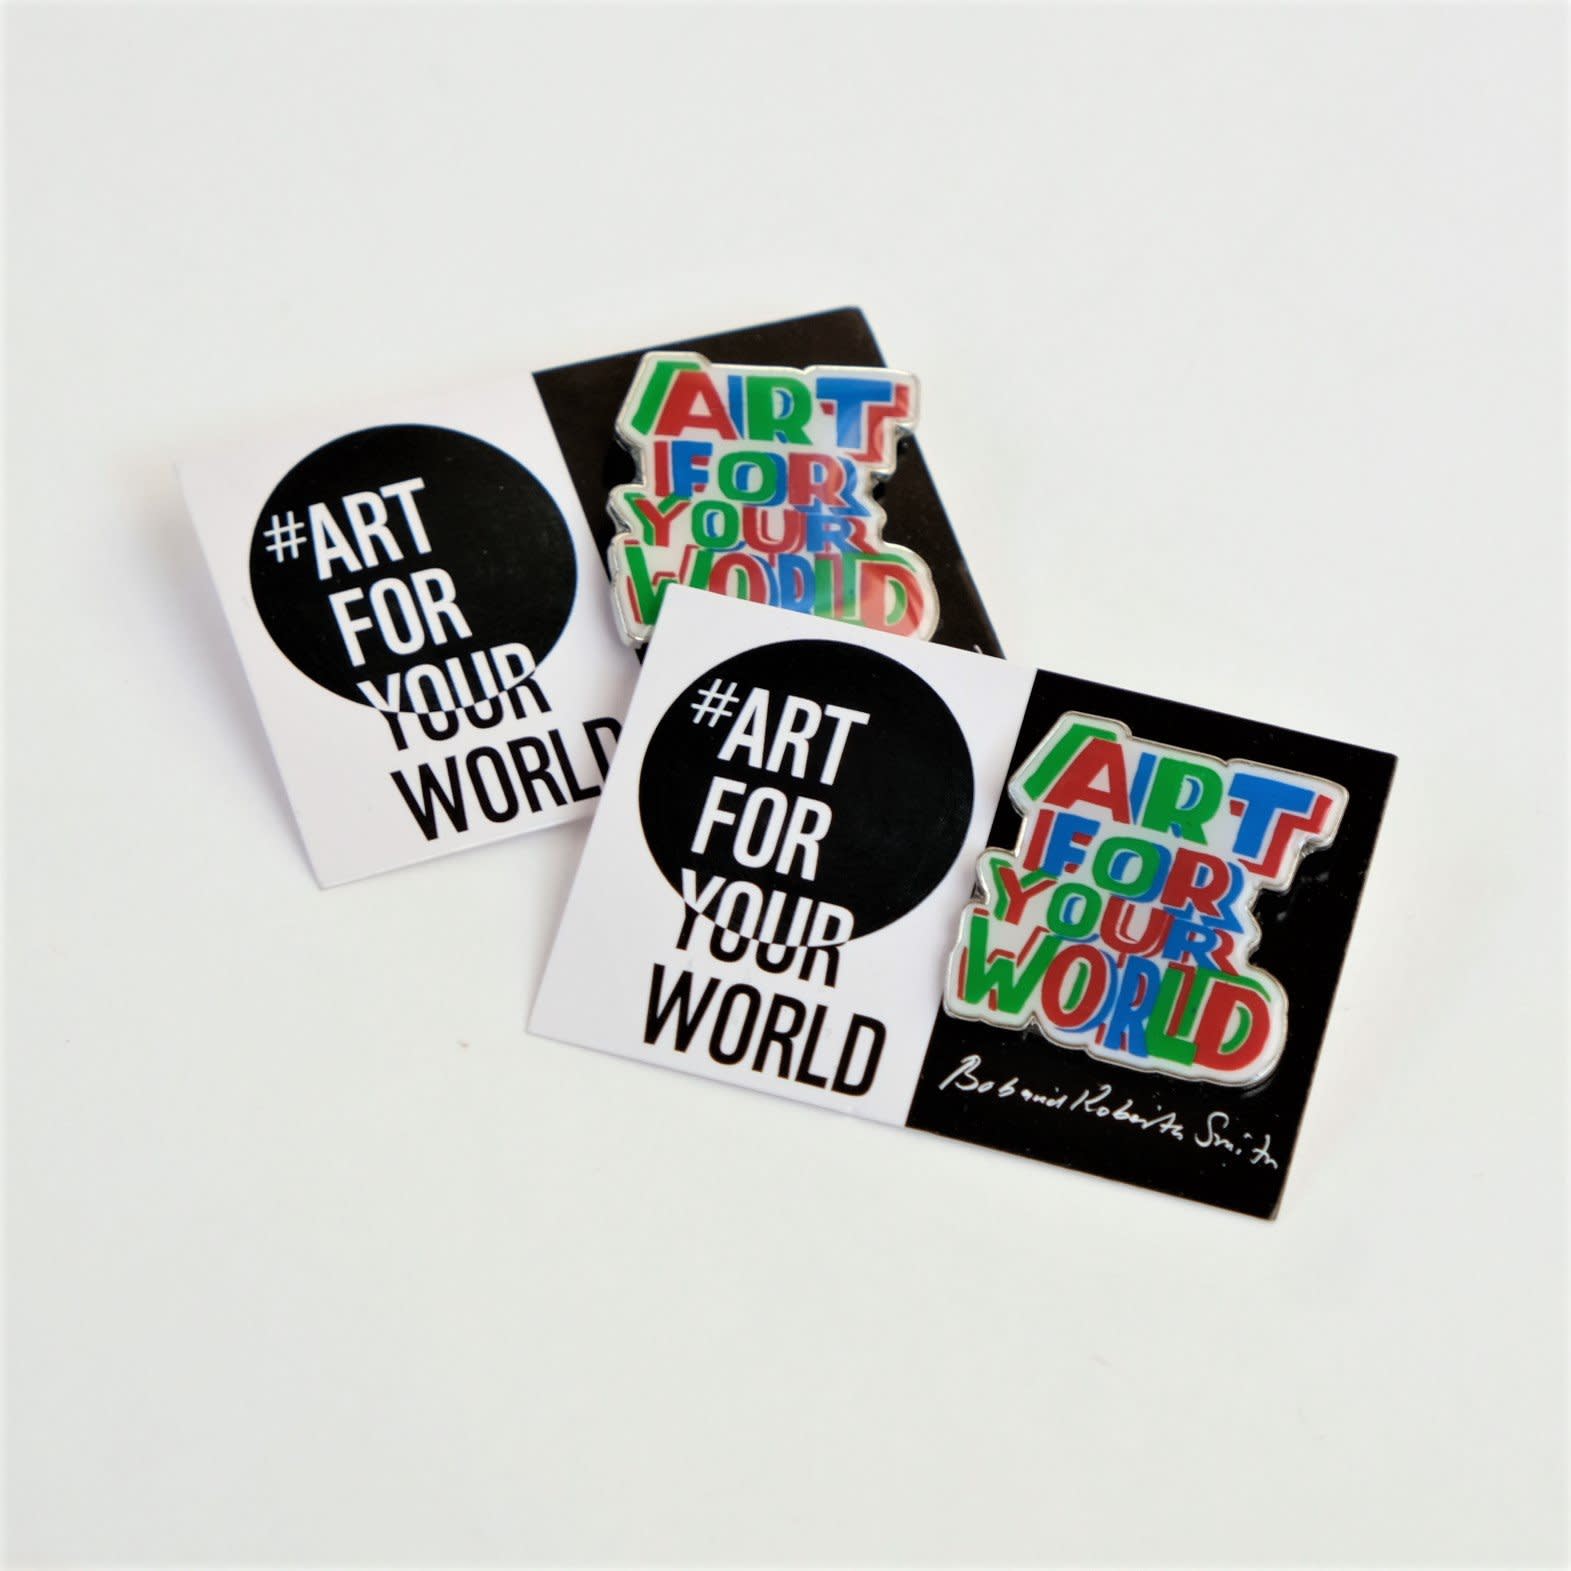 Art For Your World Badges £3.50 BUY NOW